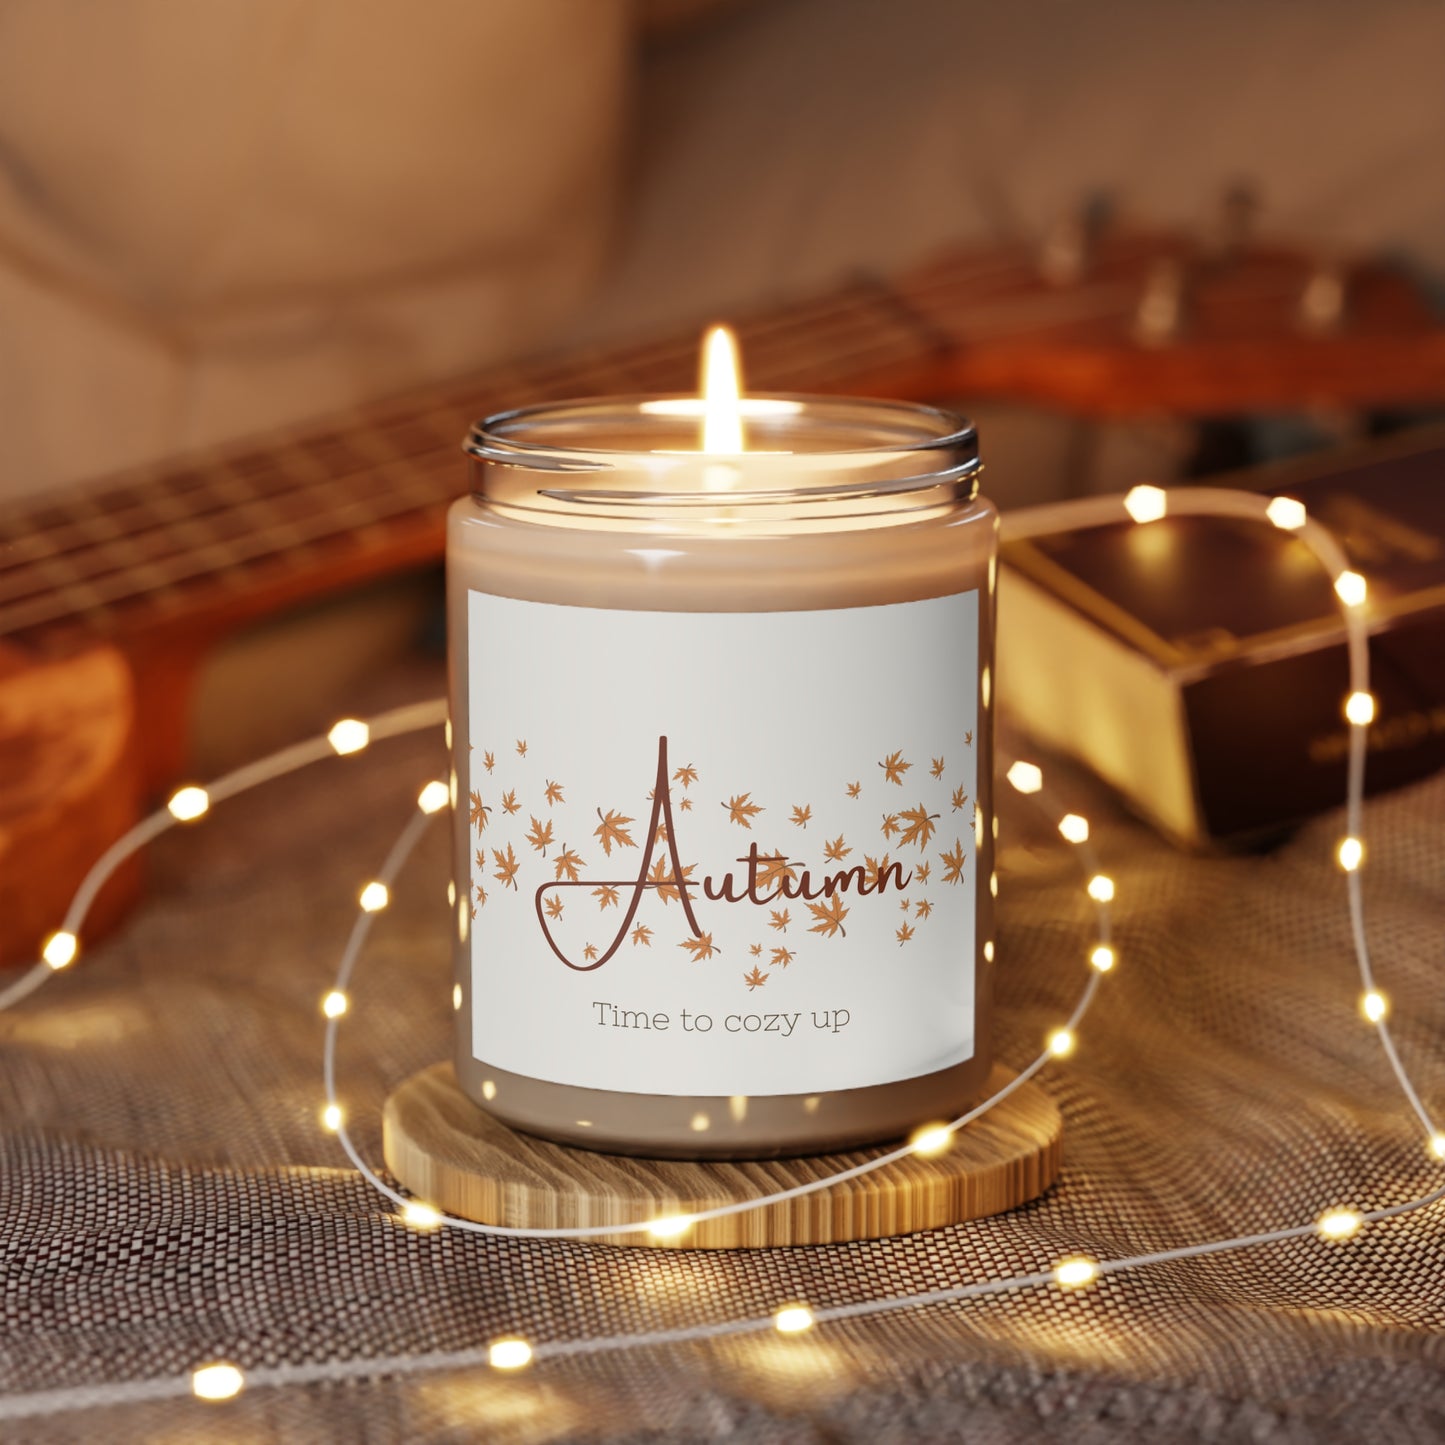 Autumn Aromatherapy Scented Candle, Cinnamon Stick Scent, Relaxation, Self-Care, Gift for Her, Holiday Vegan Candle